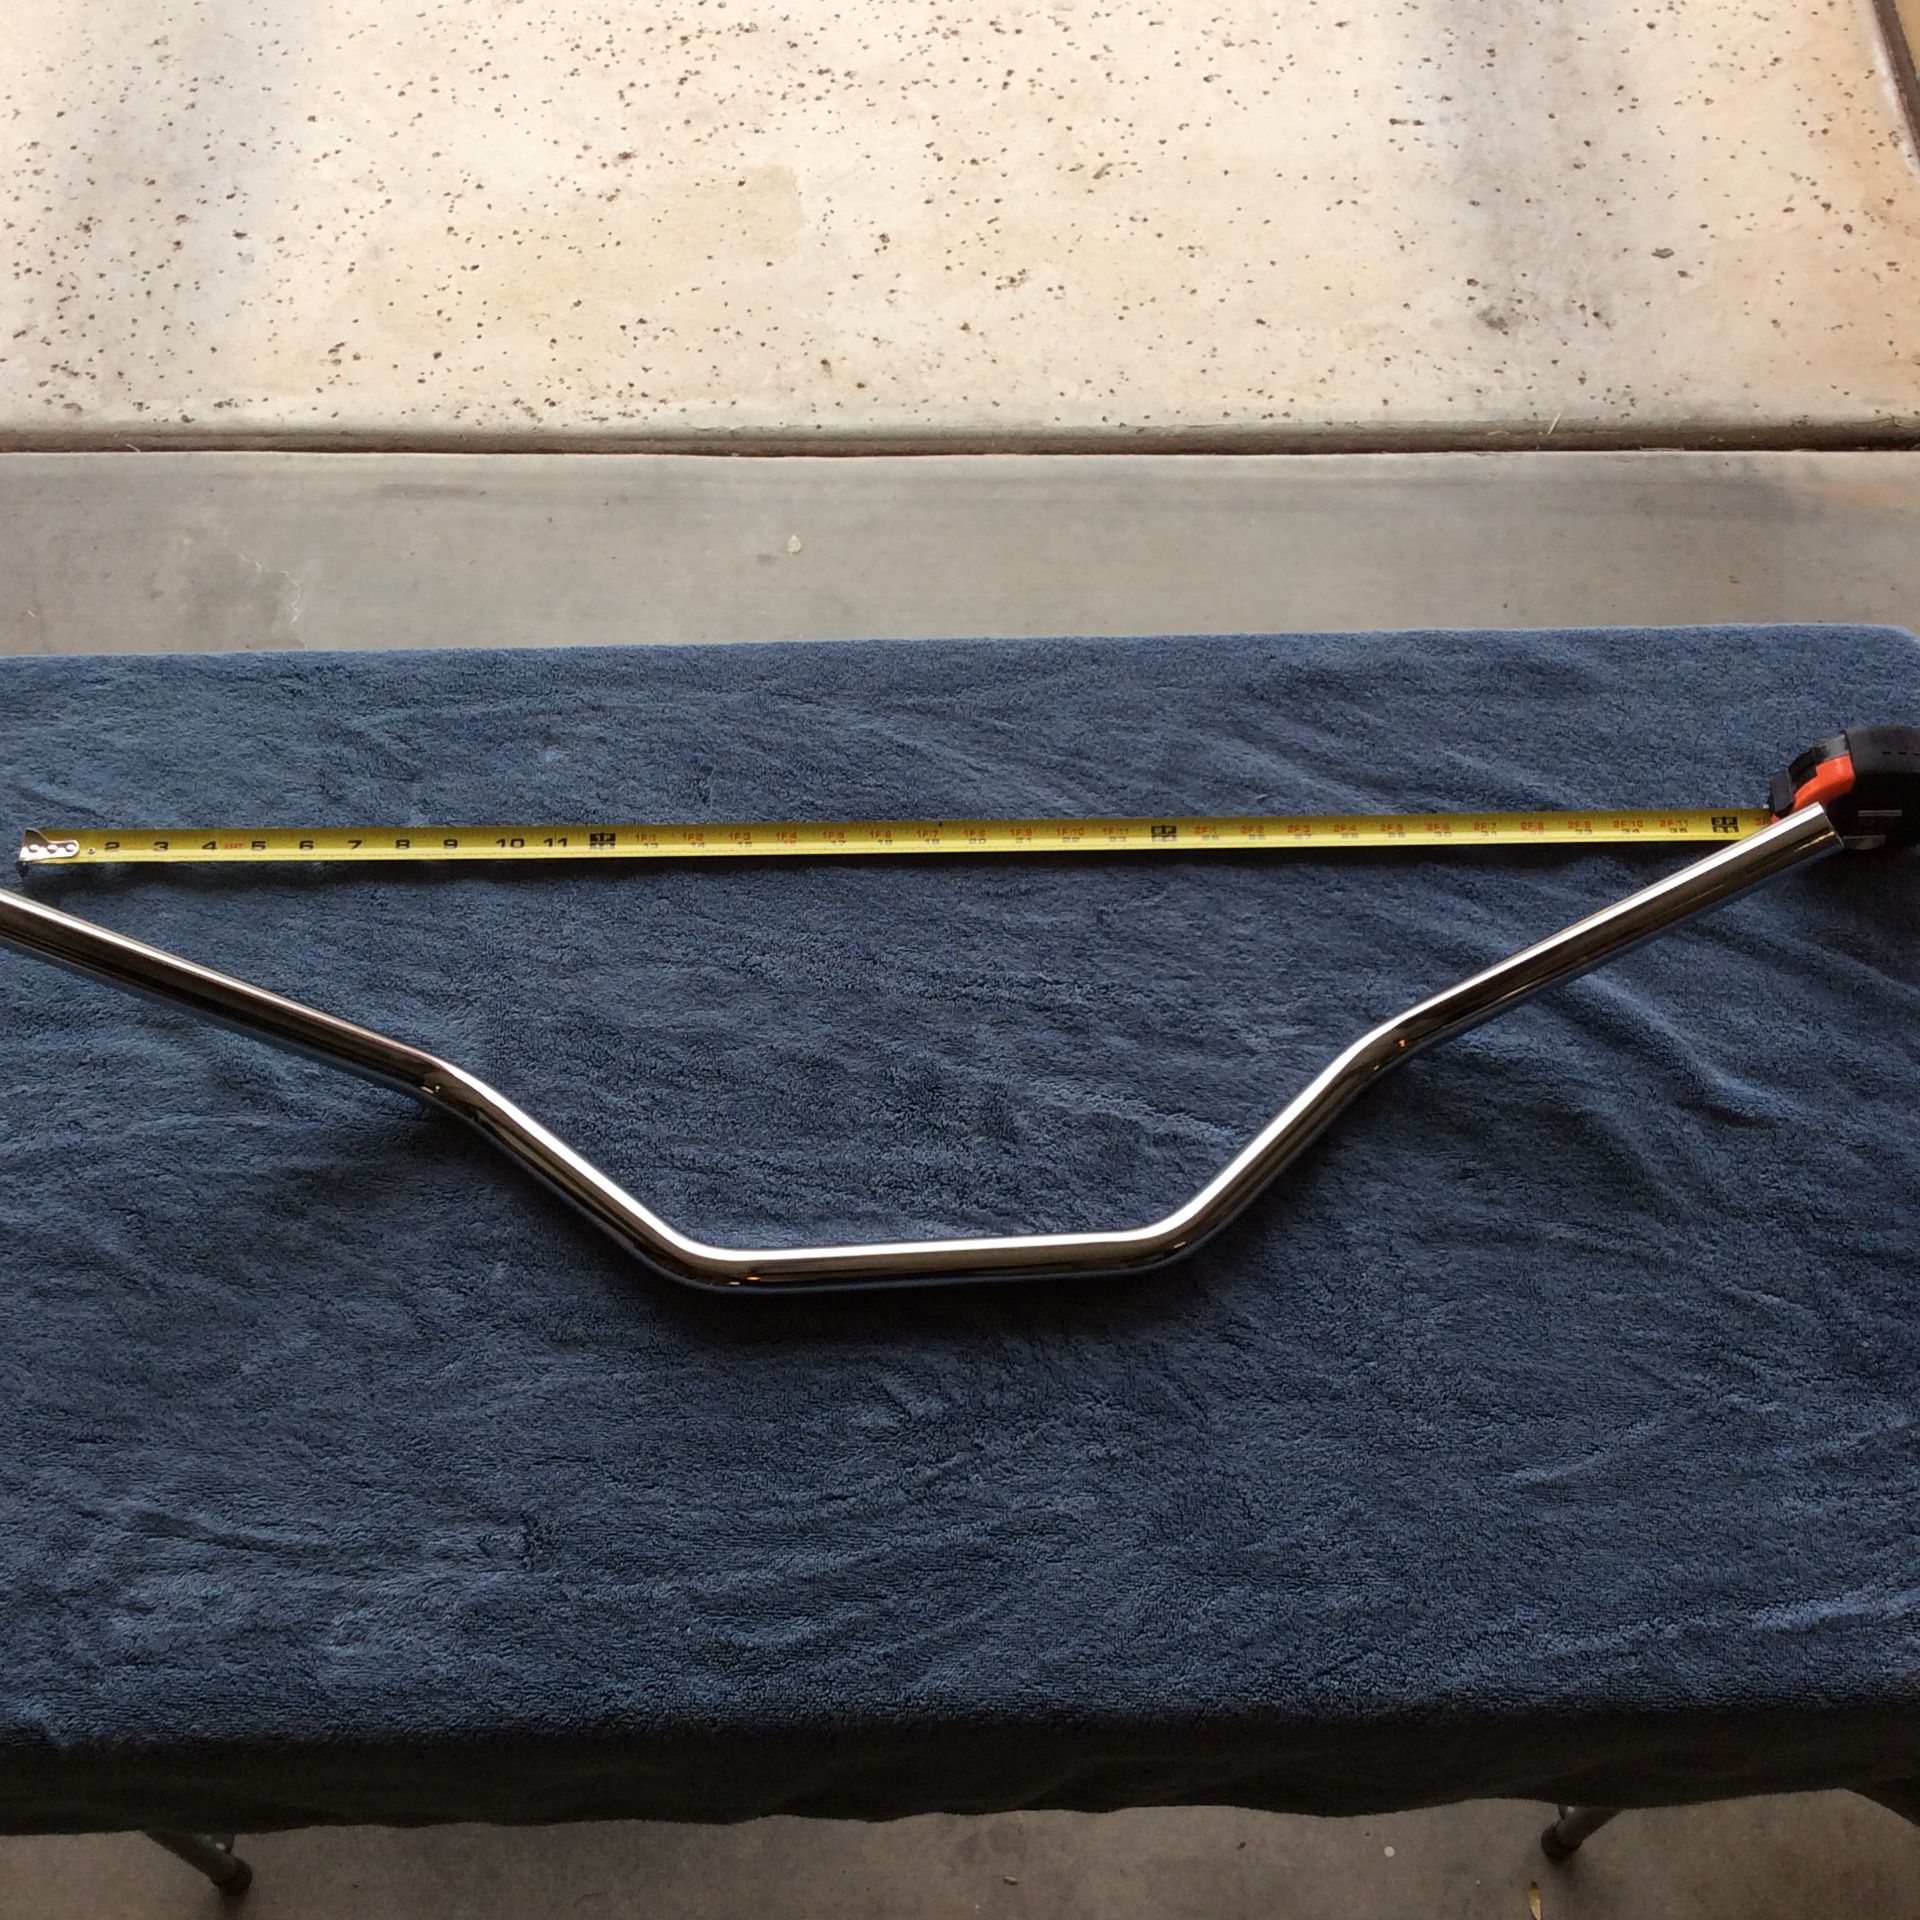 Motorcycle Handlebars 1”. Was purchased for a Triumph Bonneville but I don’t believe they were used. Good condition.